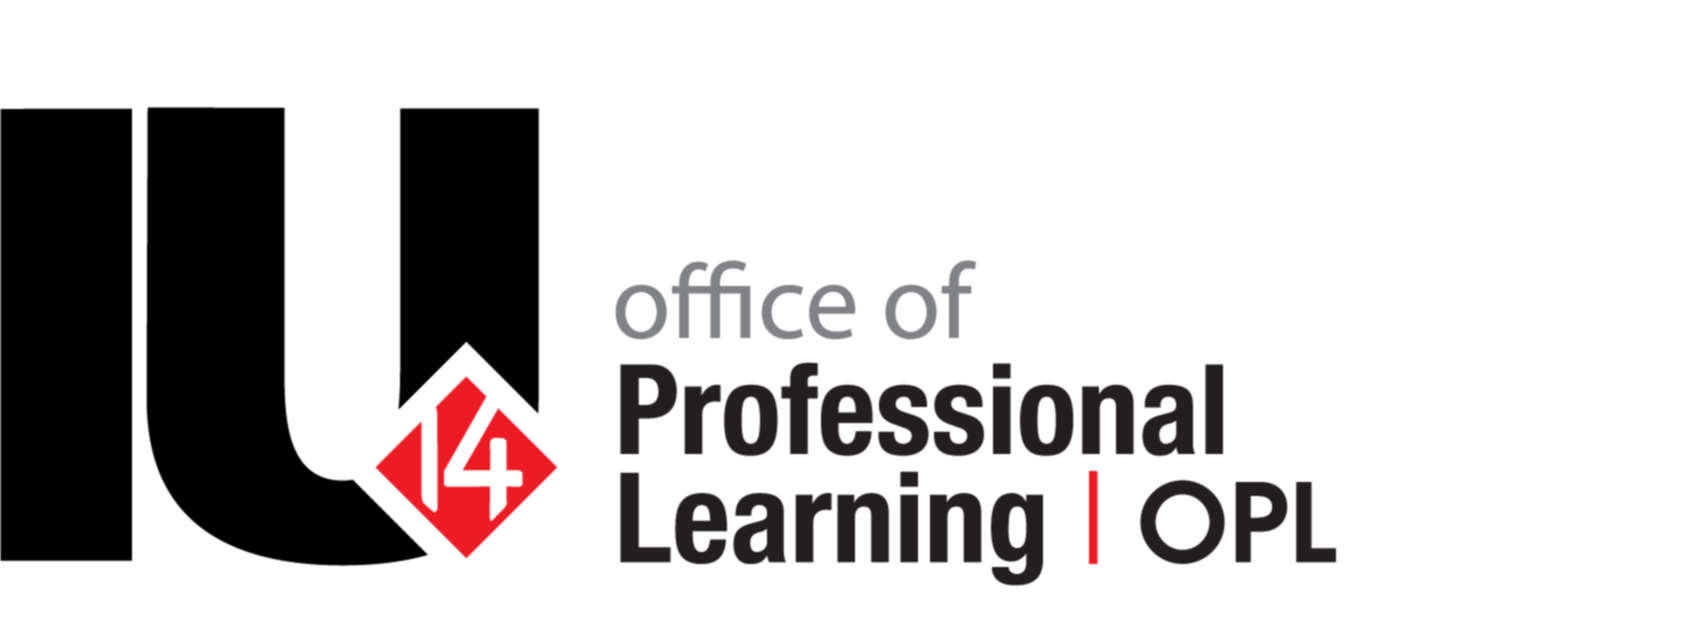 Office of Professional Learning